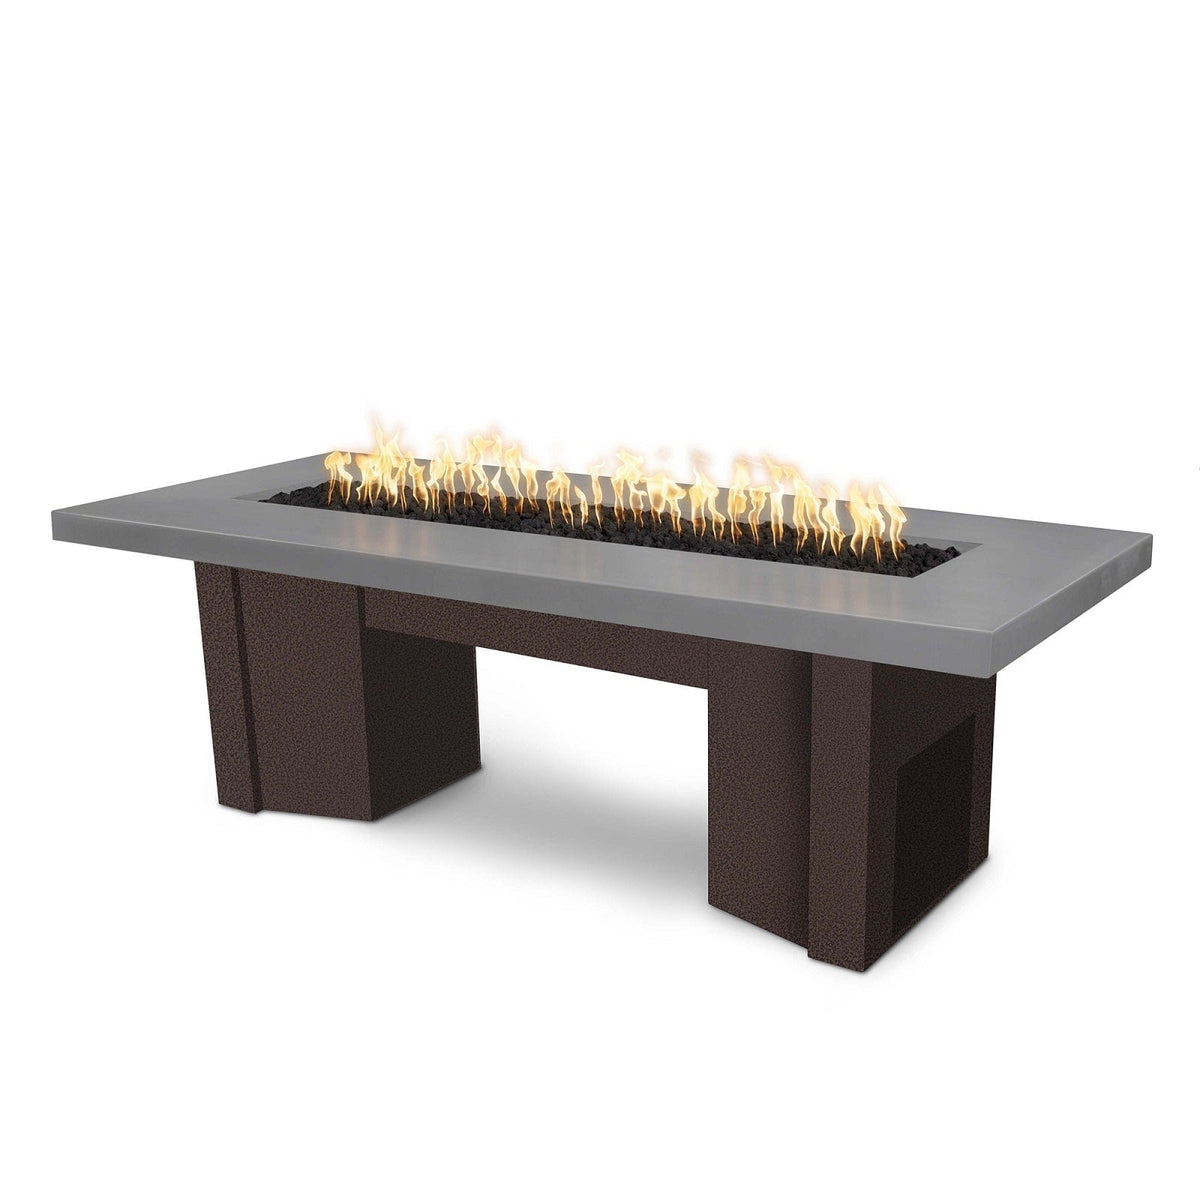 The Outdoor Plus Fire Features Natural Gray (-NGY) / Copper Vein Powder Coated Steel (-CPV) The Outdoor Plus 60&quot; Alameda Fire Table Smooth Concrete in Natural Gas - 12V Electronic Ignition / OPT-ALMGFRC60E12V-NG